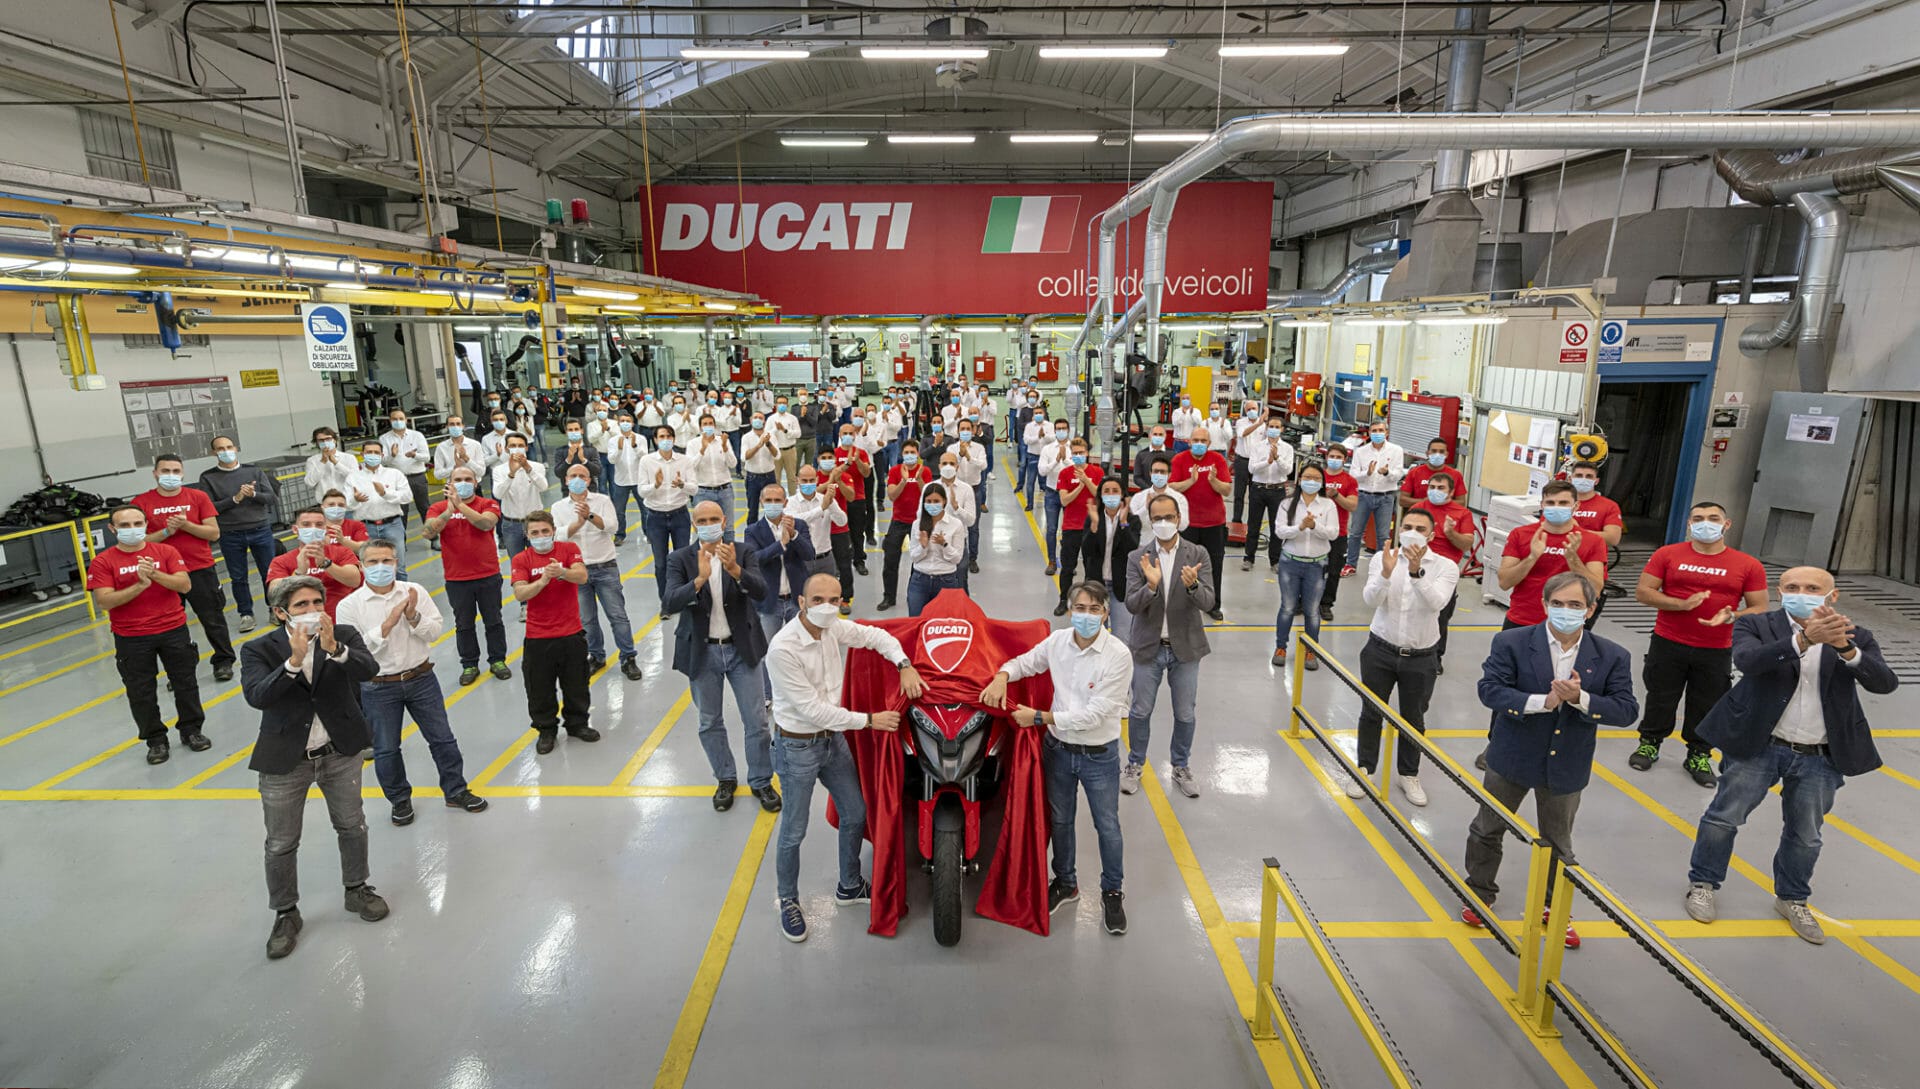 Production of the Ducati Multistrada V4 with new technology has already started
- also in the App MOTORCYCLE NEWS